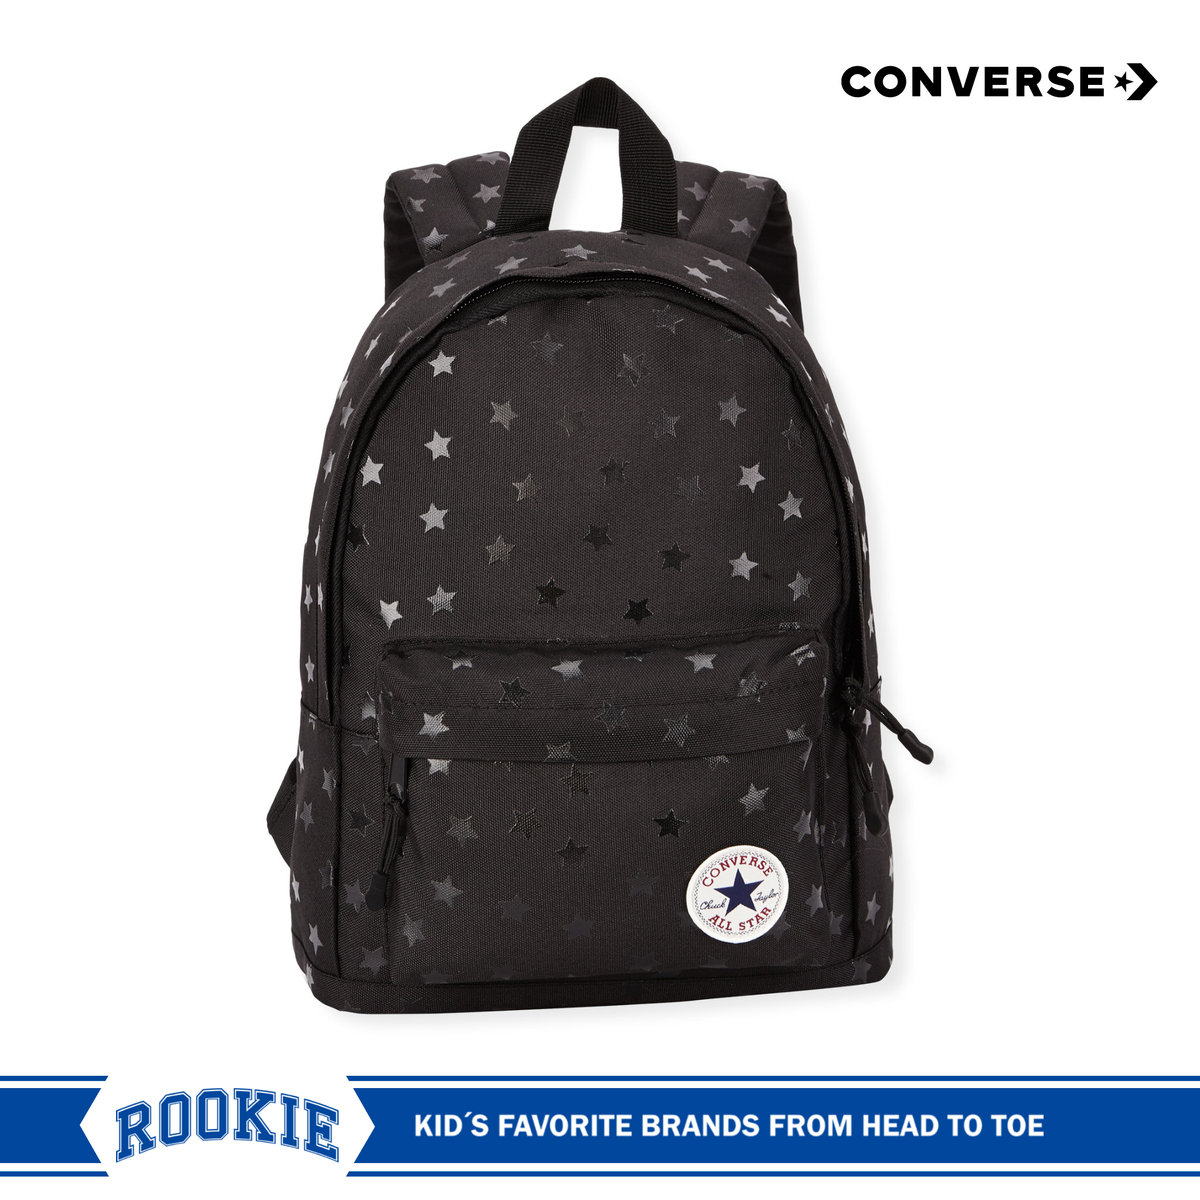 converse bags online shopping